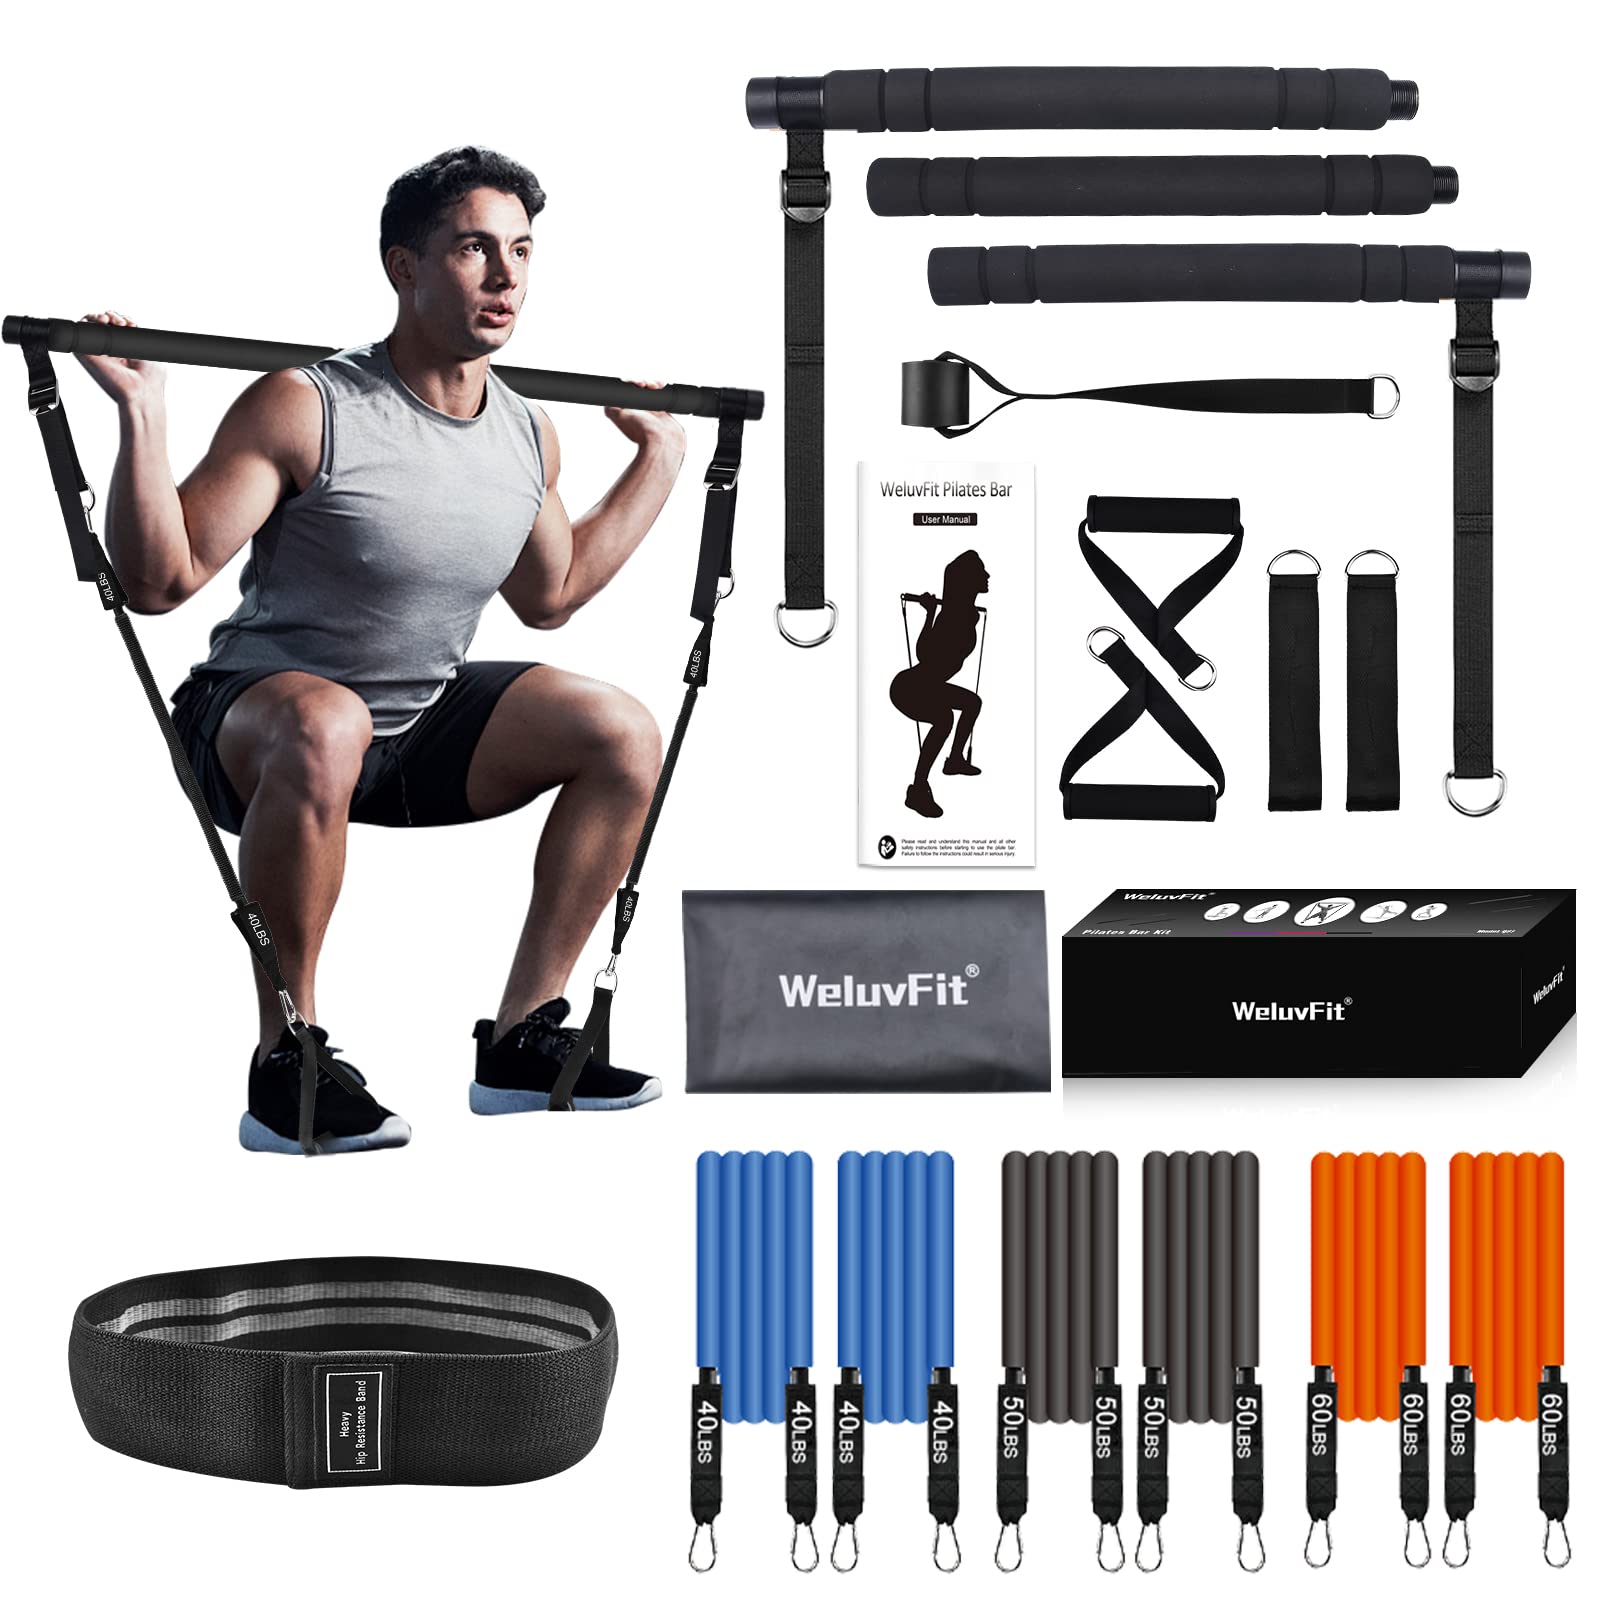 Pilates Bar Kit with Resistance Bands (40+50+60), WeluvFit Exercise Fitness Equipment for Women & Men, Home Gym Workouts Stainless Steel Stick Squat Yoga Pilates Flexbands Kit for Full Body Shaping